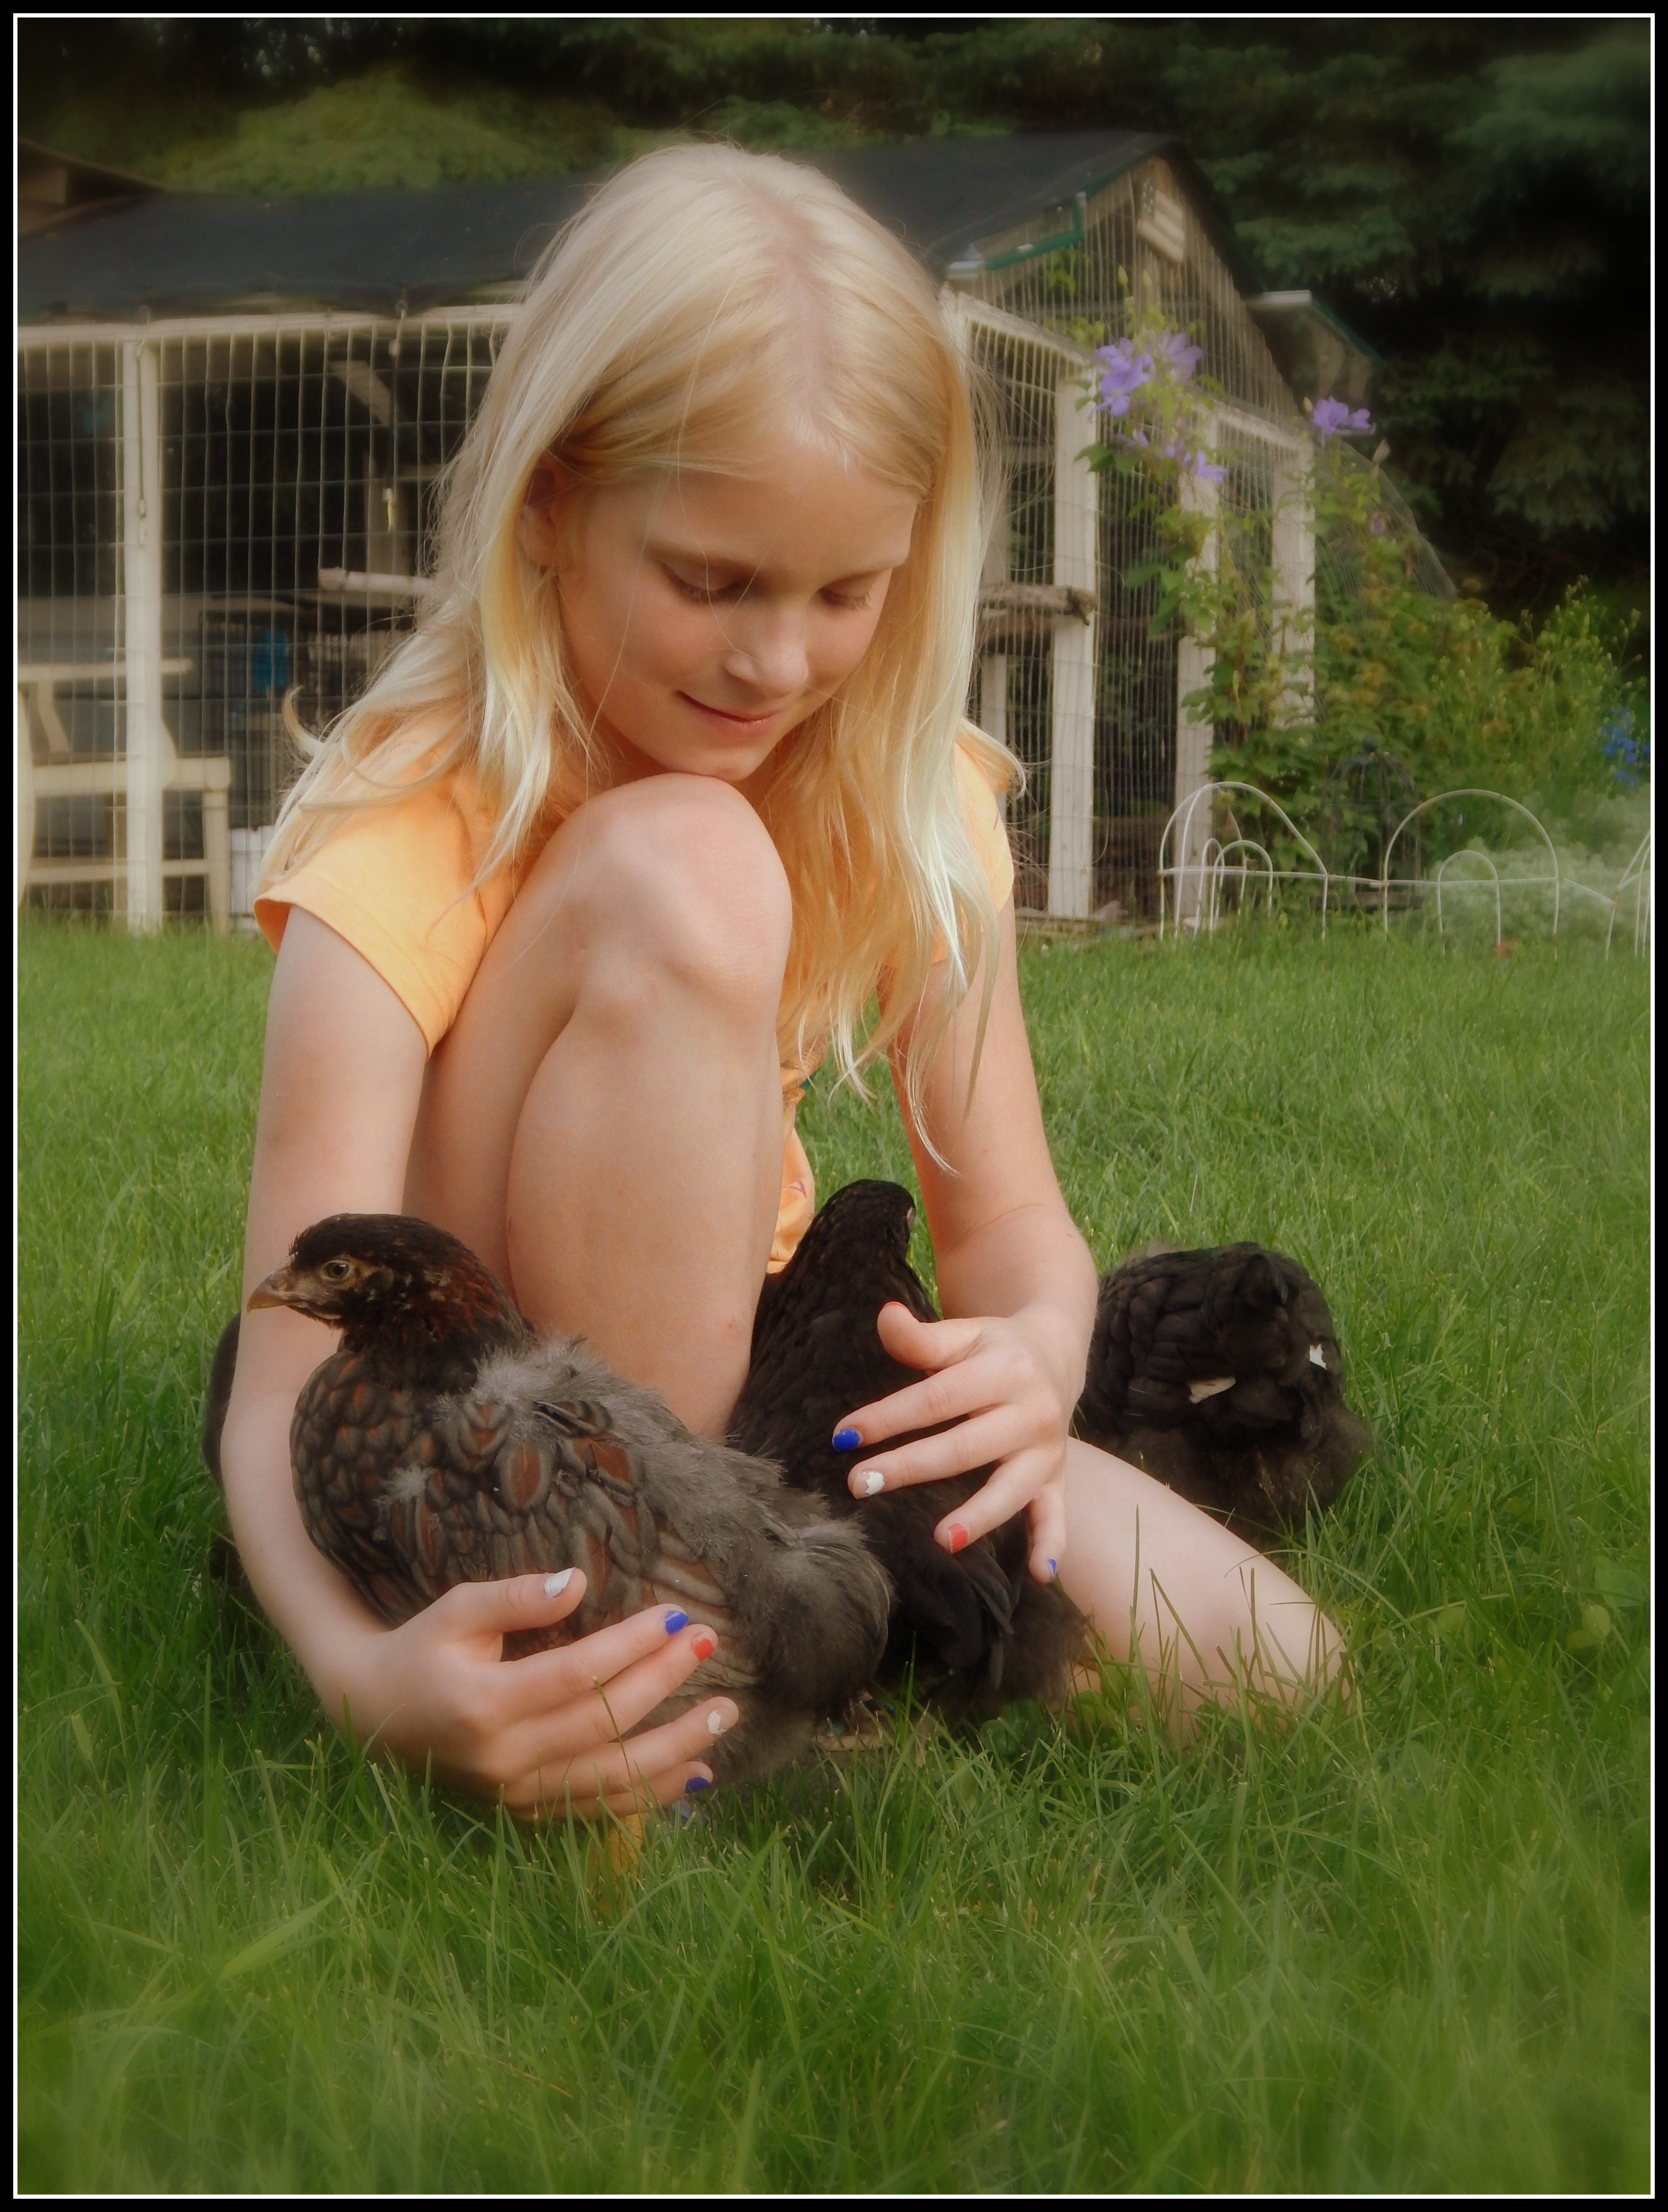 Chillin with her peeps. The Black Copper Marans is in the photo. Seems the single of her were all blurry.